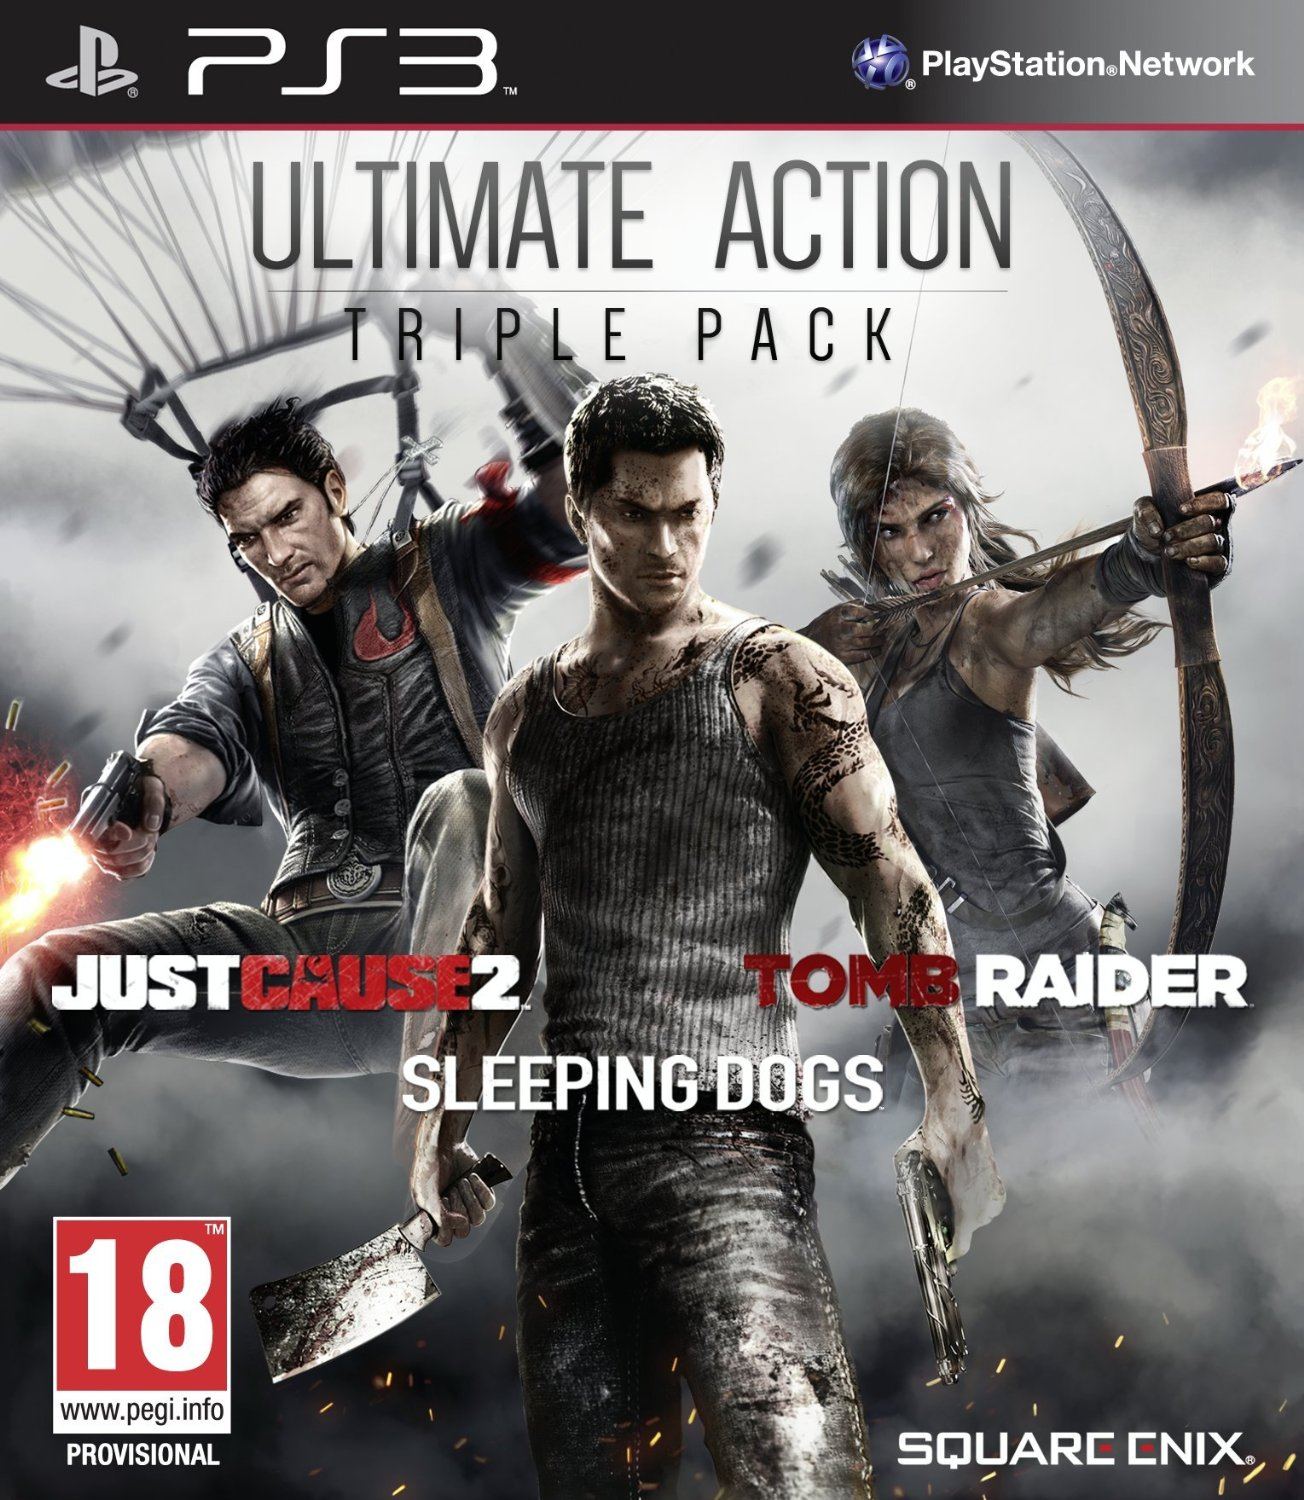 Ultimate Action Triple Pack for PlayStation 3